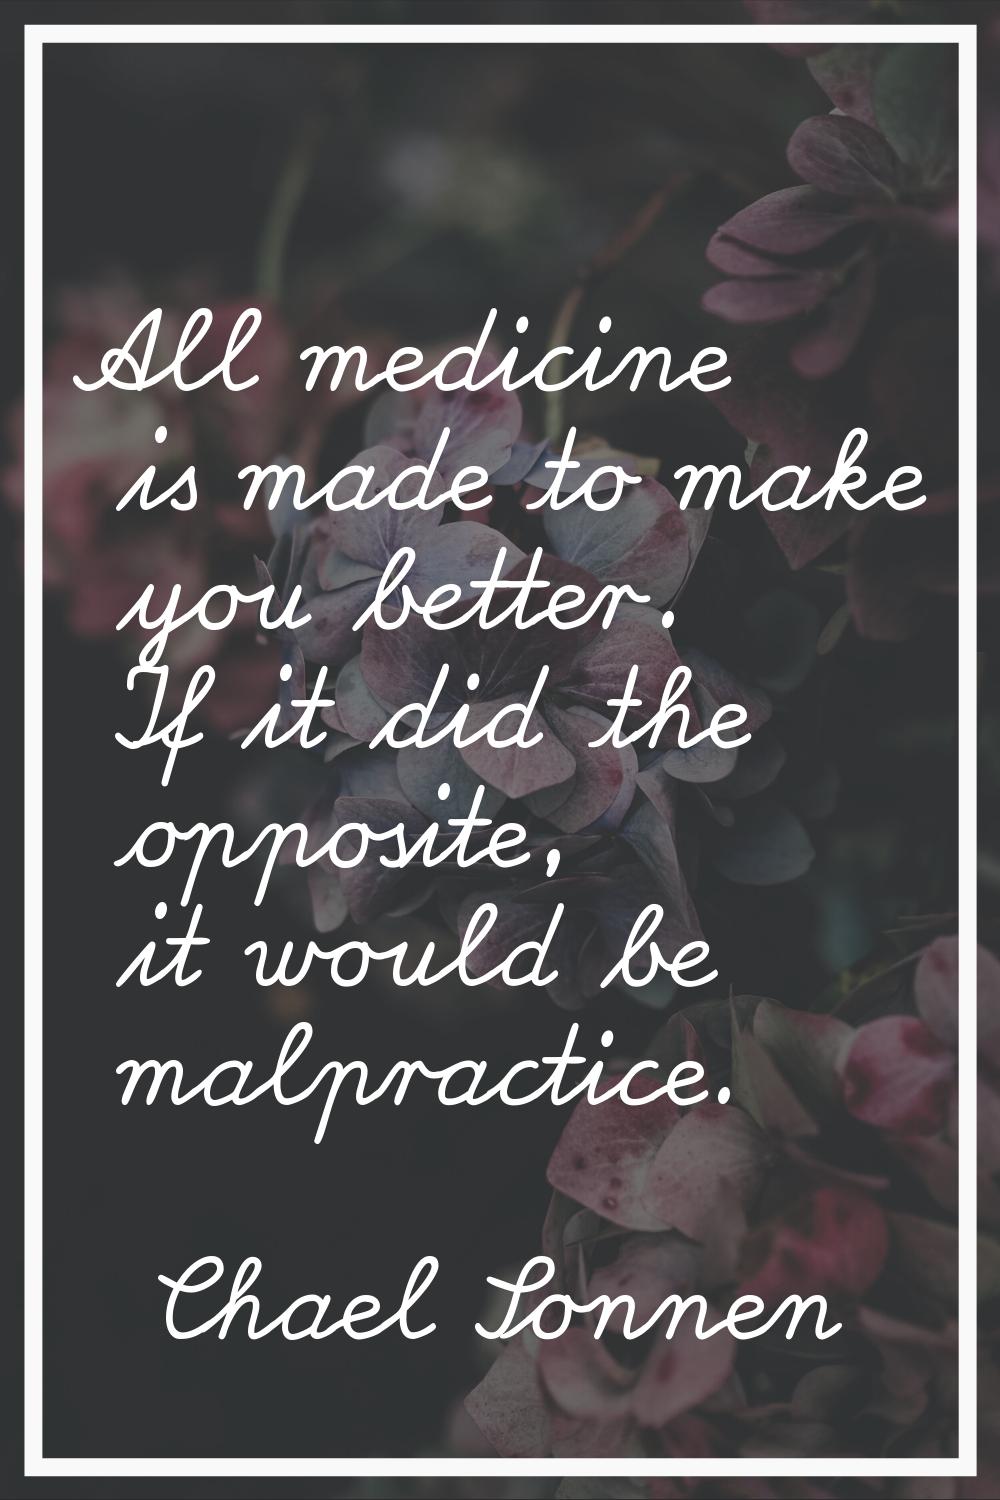 All medicine is made to make you better. If it did the opposite, it would be malpractice.